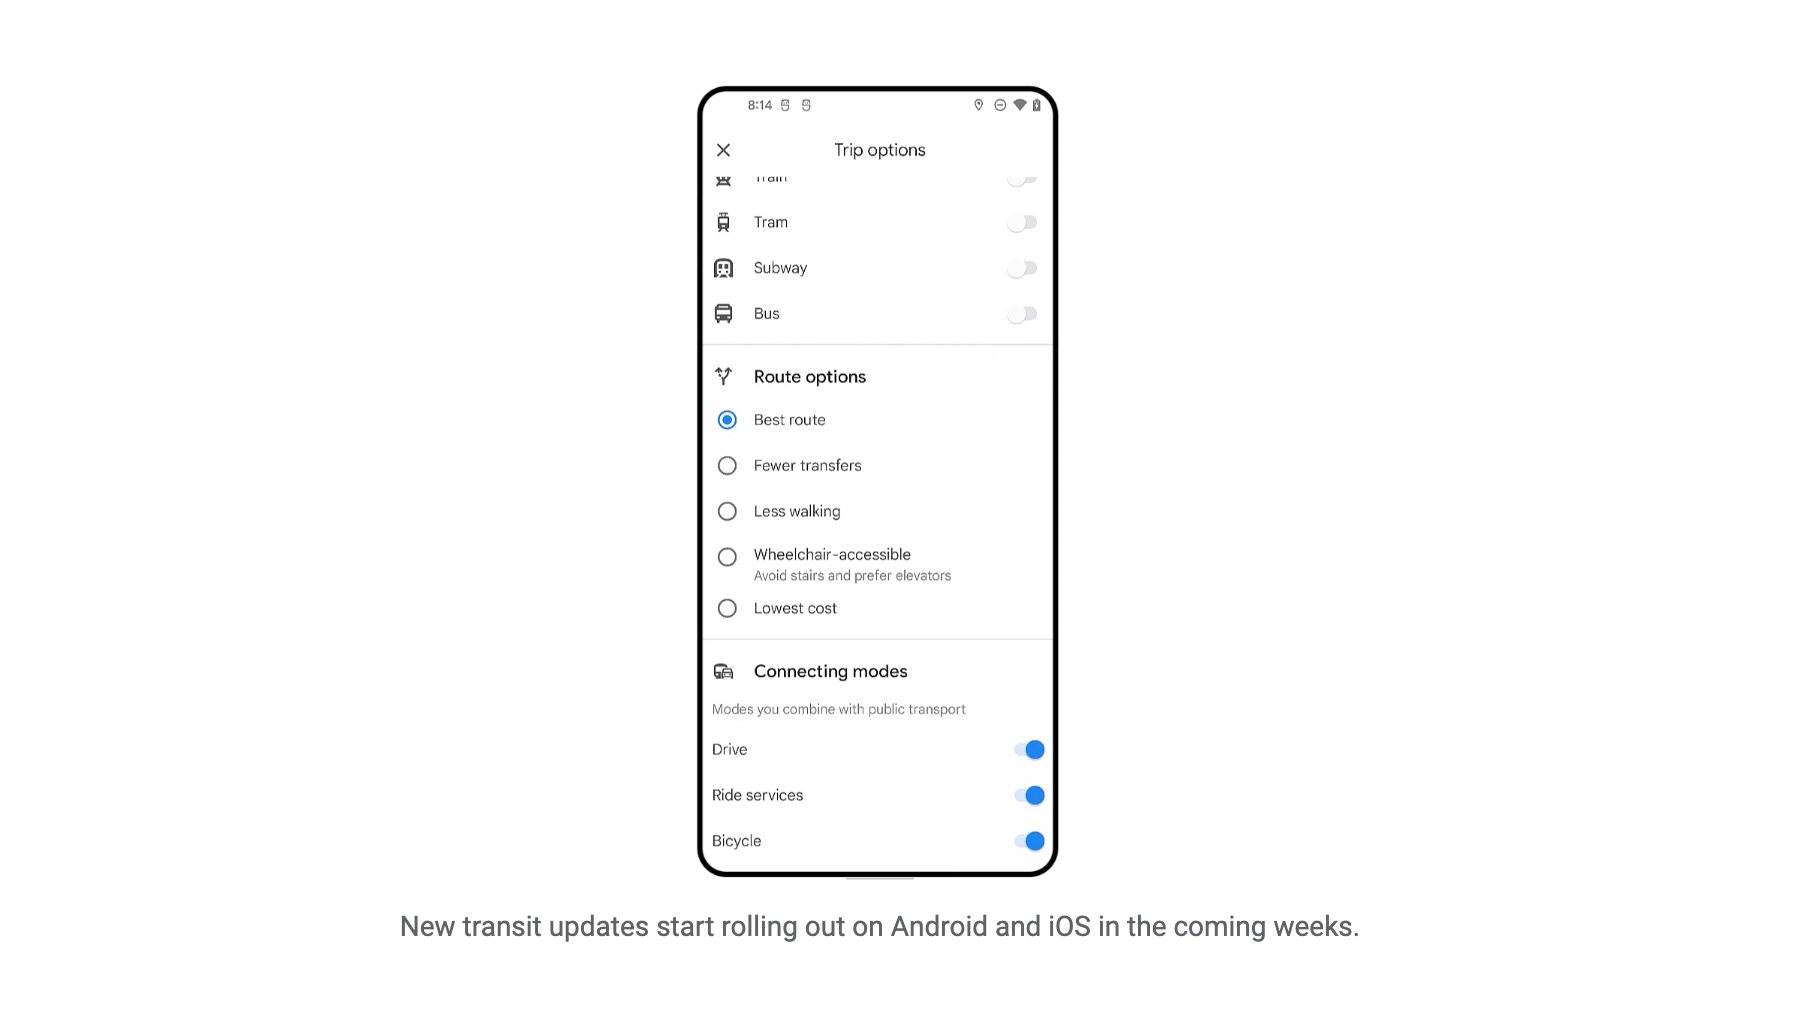 Google Maps update showing more robust route options for planning a public transit trip